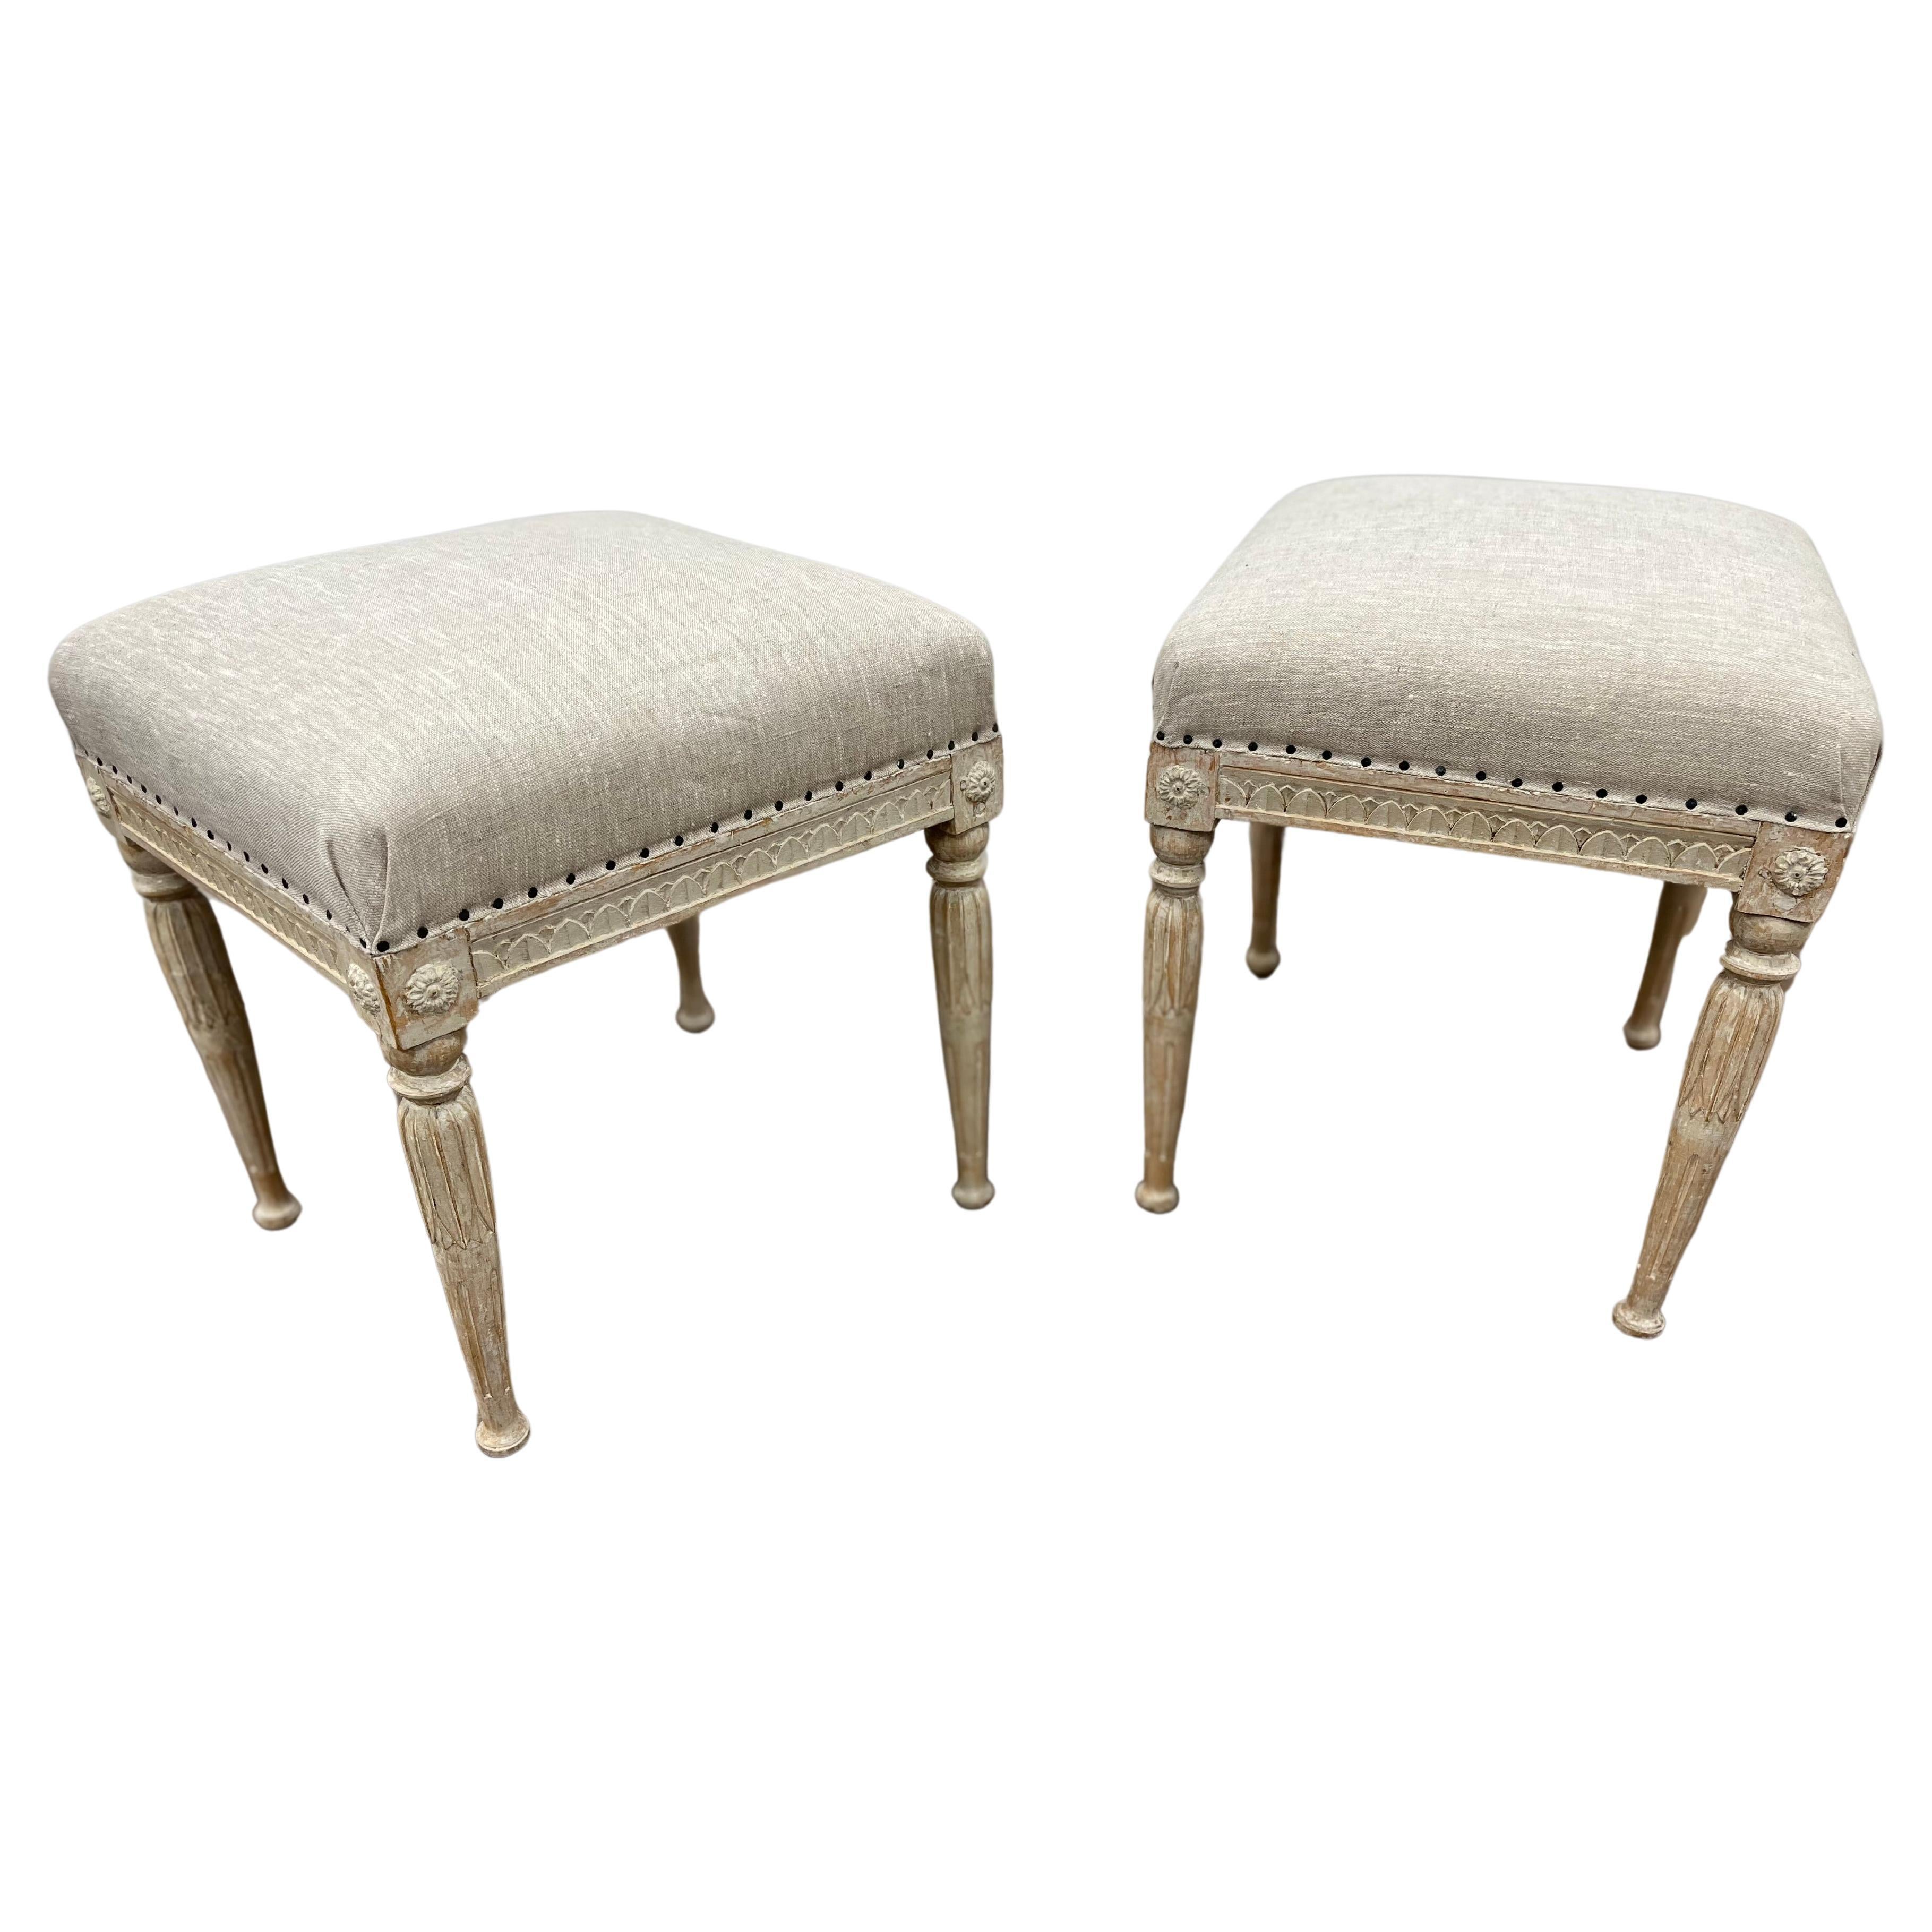 Pair of 18th Century Swedish Gustavian Footstools For Sale